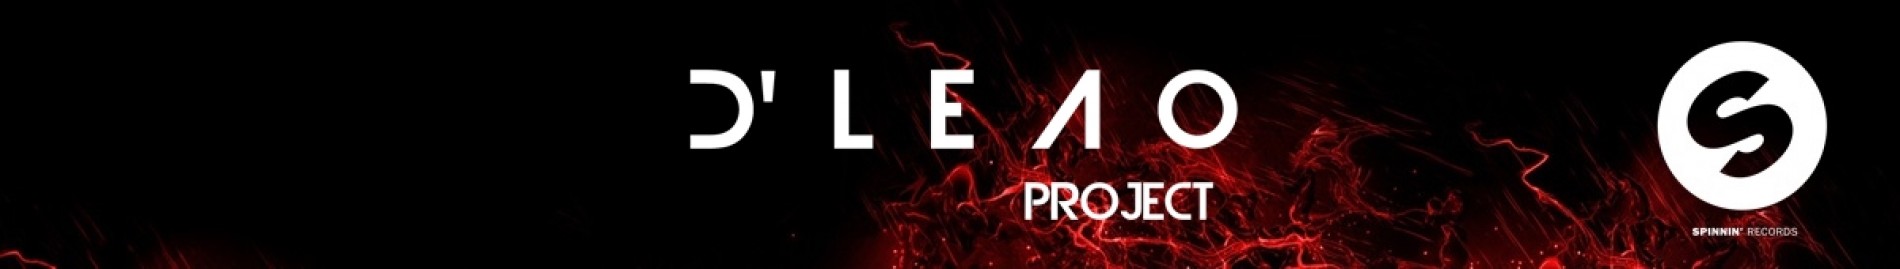 D'Leao Project